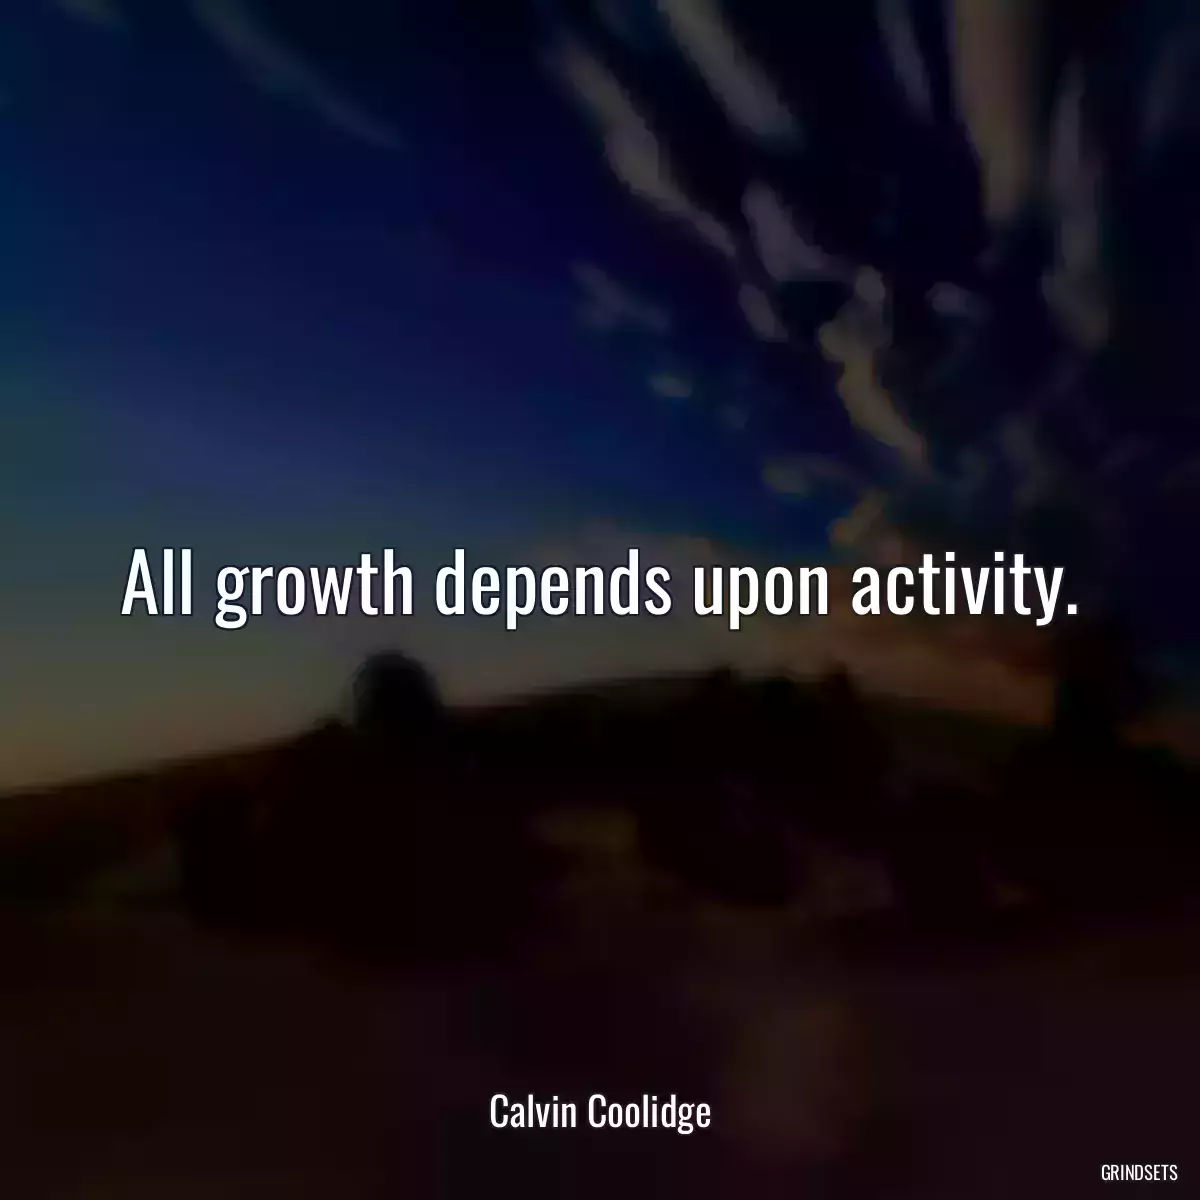 All growth depends upon activity.